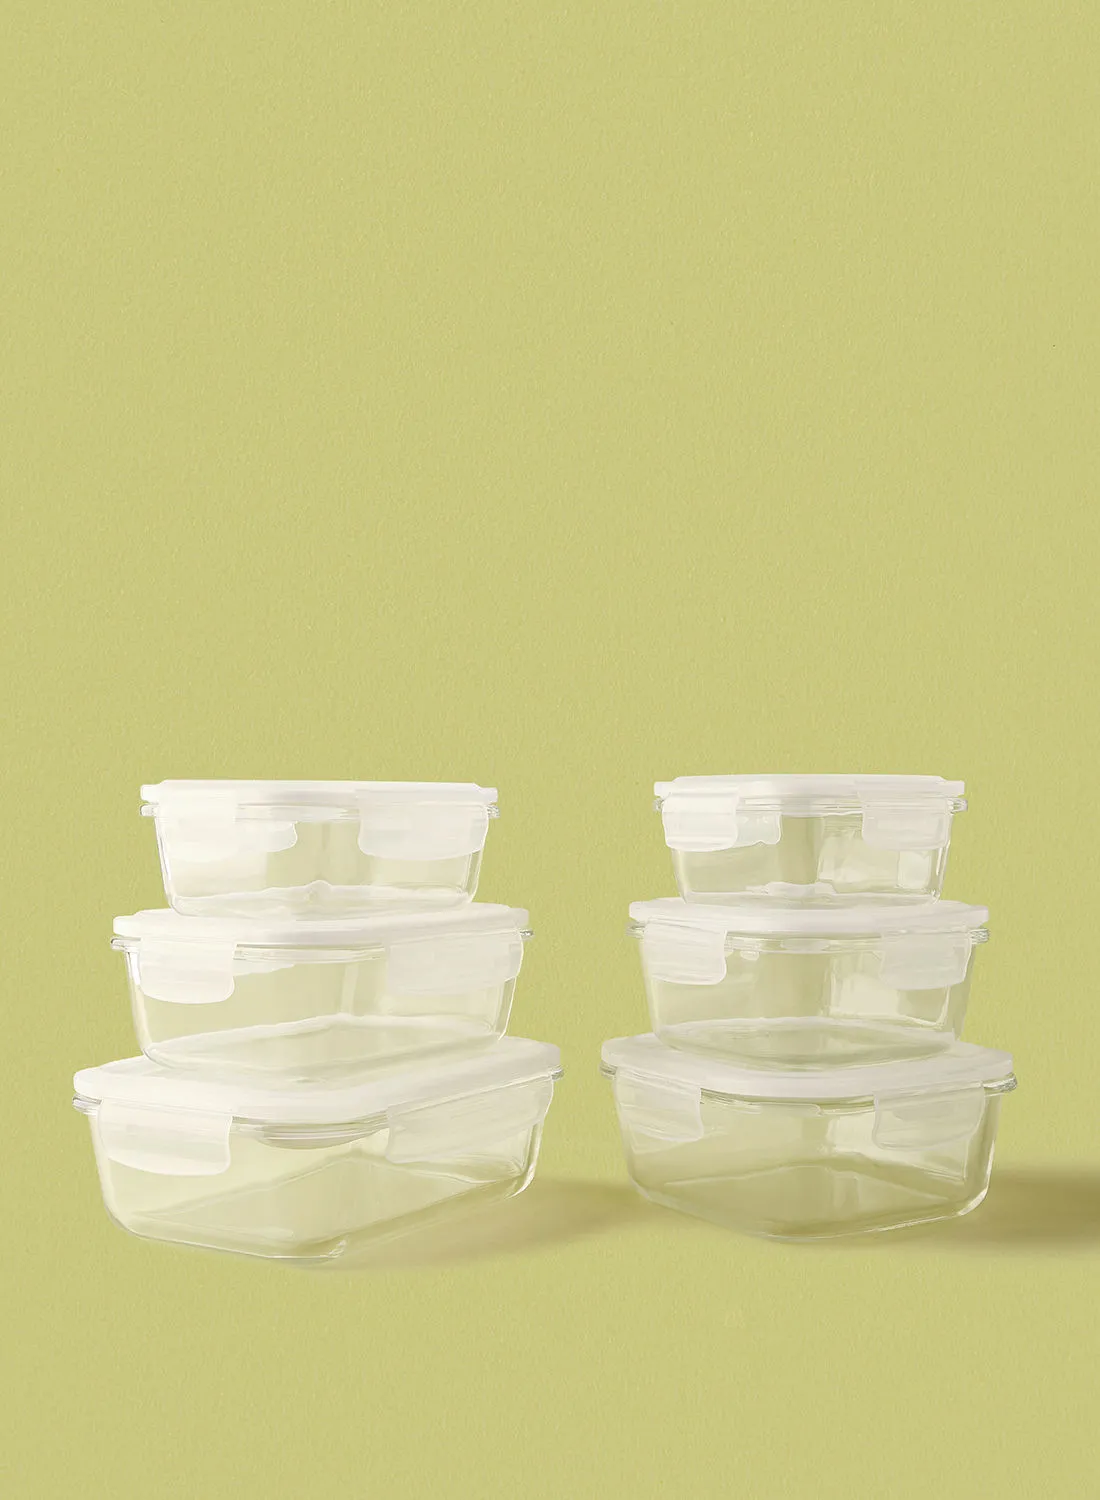 Noon East 6 Piece Borosilicate Glass Food Container Set - Airtight Lids - Lunch Box - Rectangle + Square - Food Storage Box - Storage Boxes - Kitchen Cabinet Organizers - Glass Food Container - White White 6-Piece (Rectangle/Square)